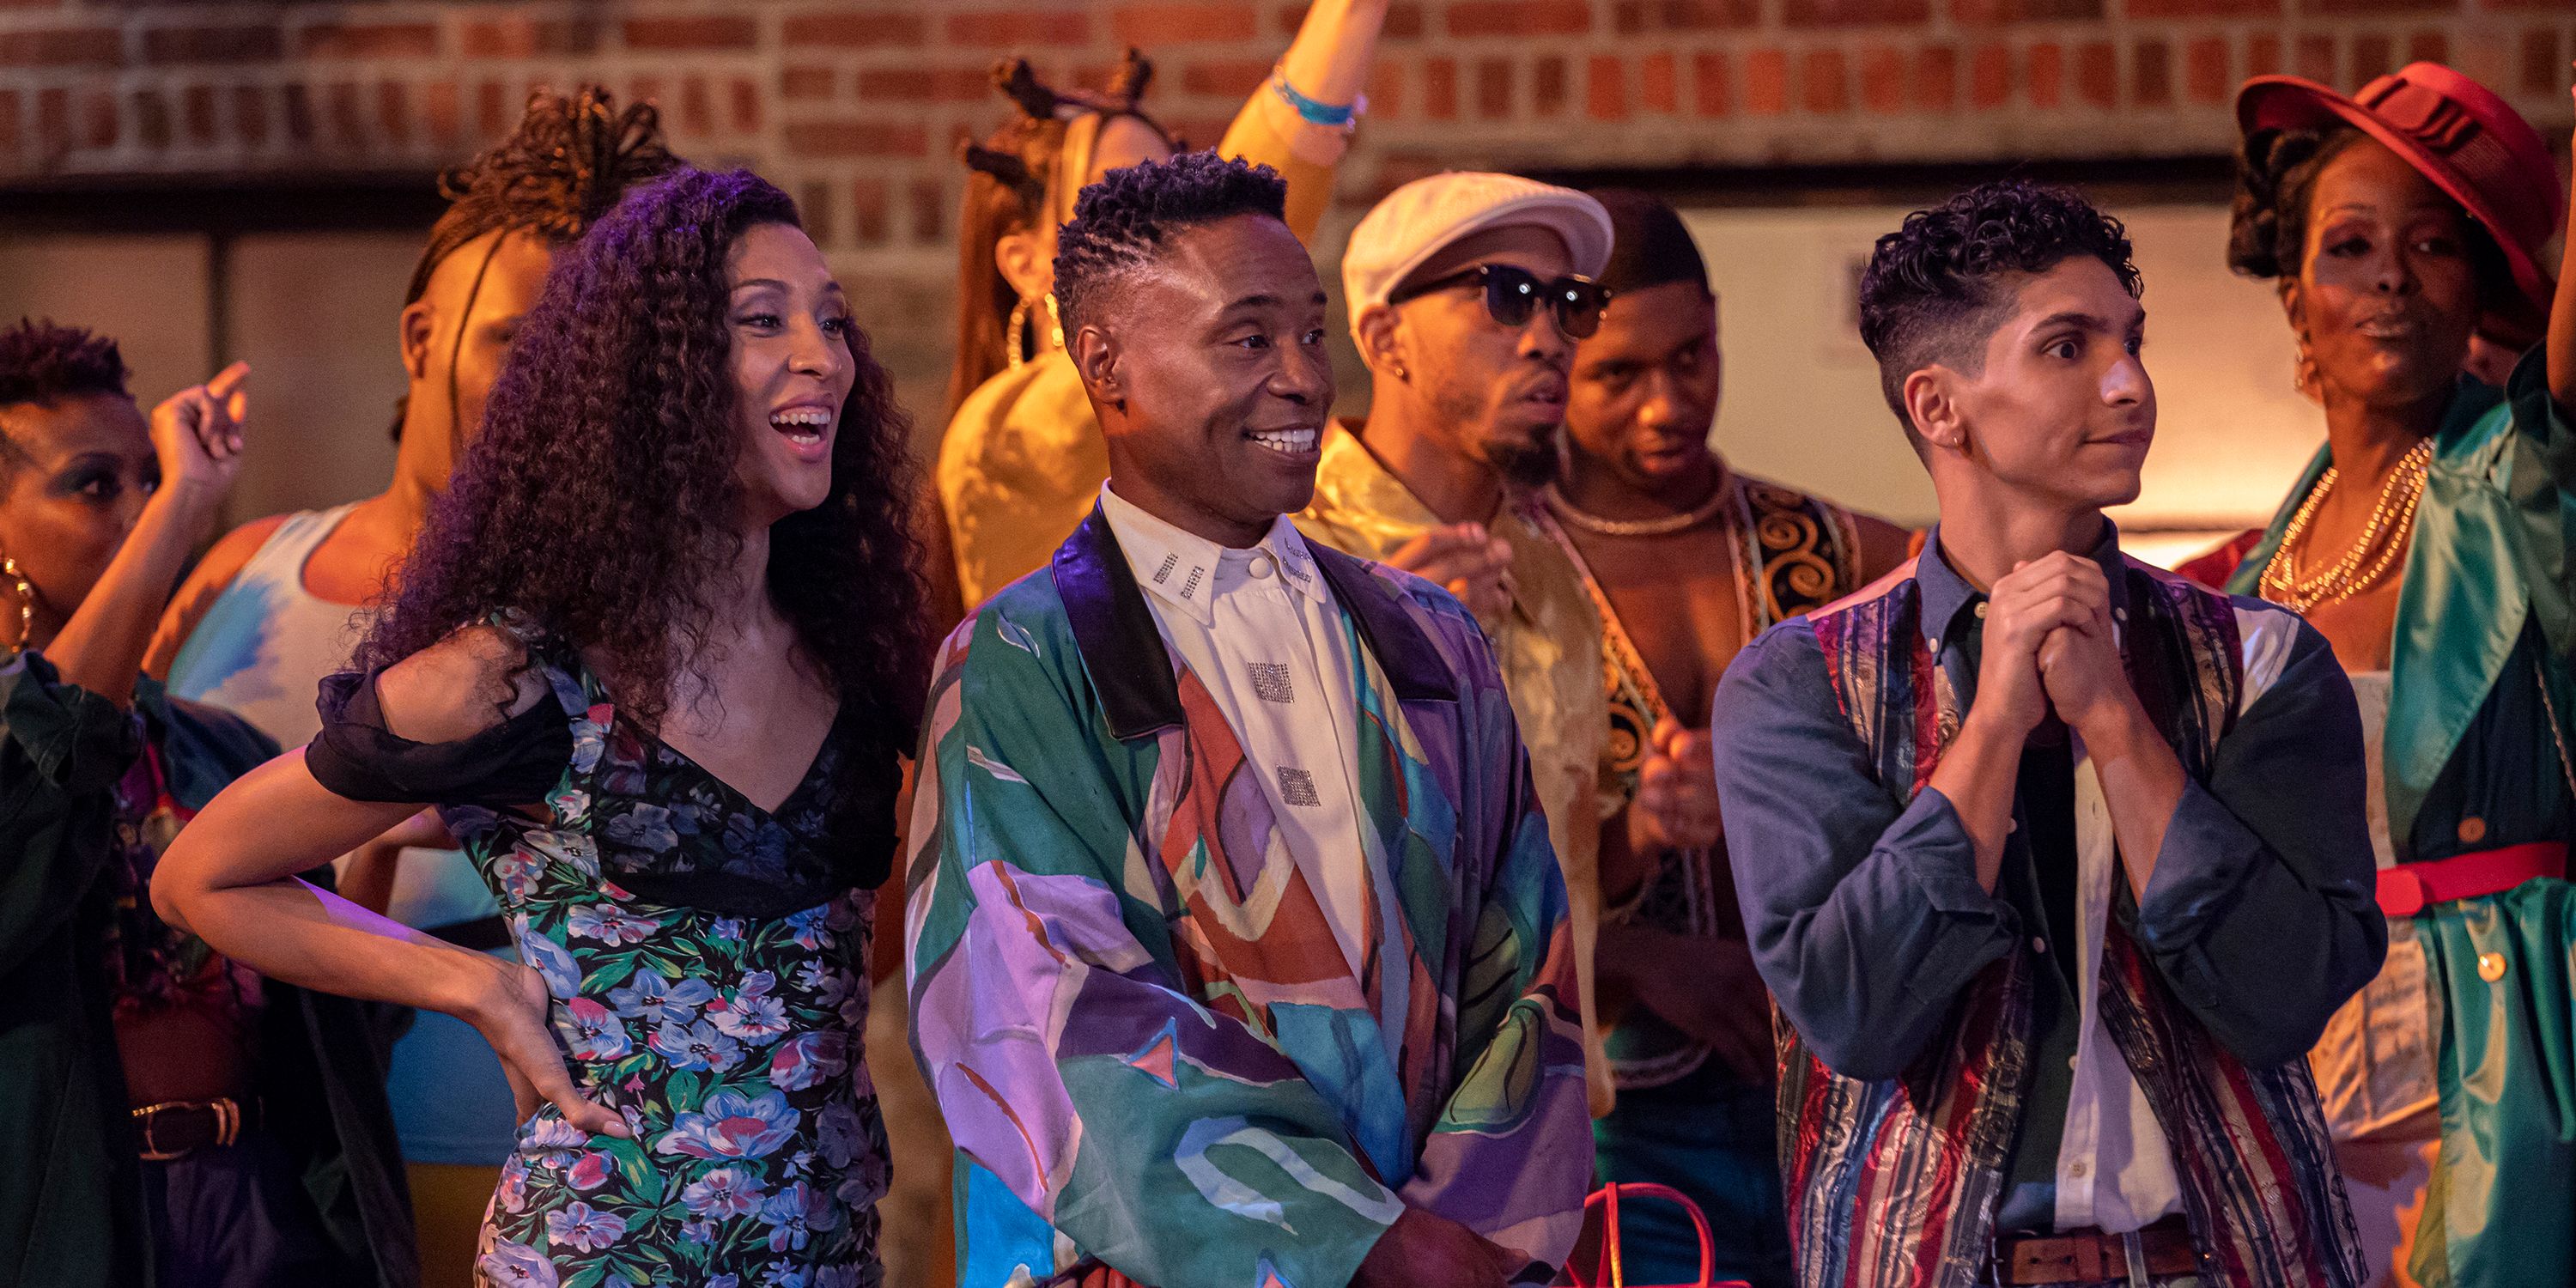 POSE -- Season 3, Episode 1 -- Pictured: Mj Rodriguez as Blanca, Billy Porter as Pray Tell, Angel Bismark Curiel as Lil Papi. CR: Eric Liebowitz/FX